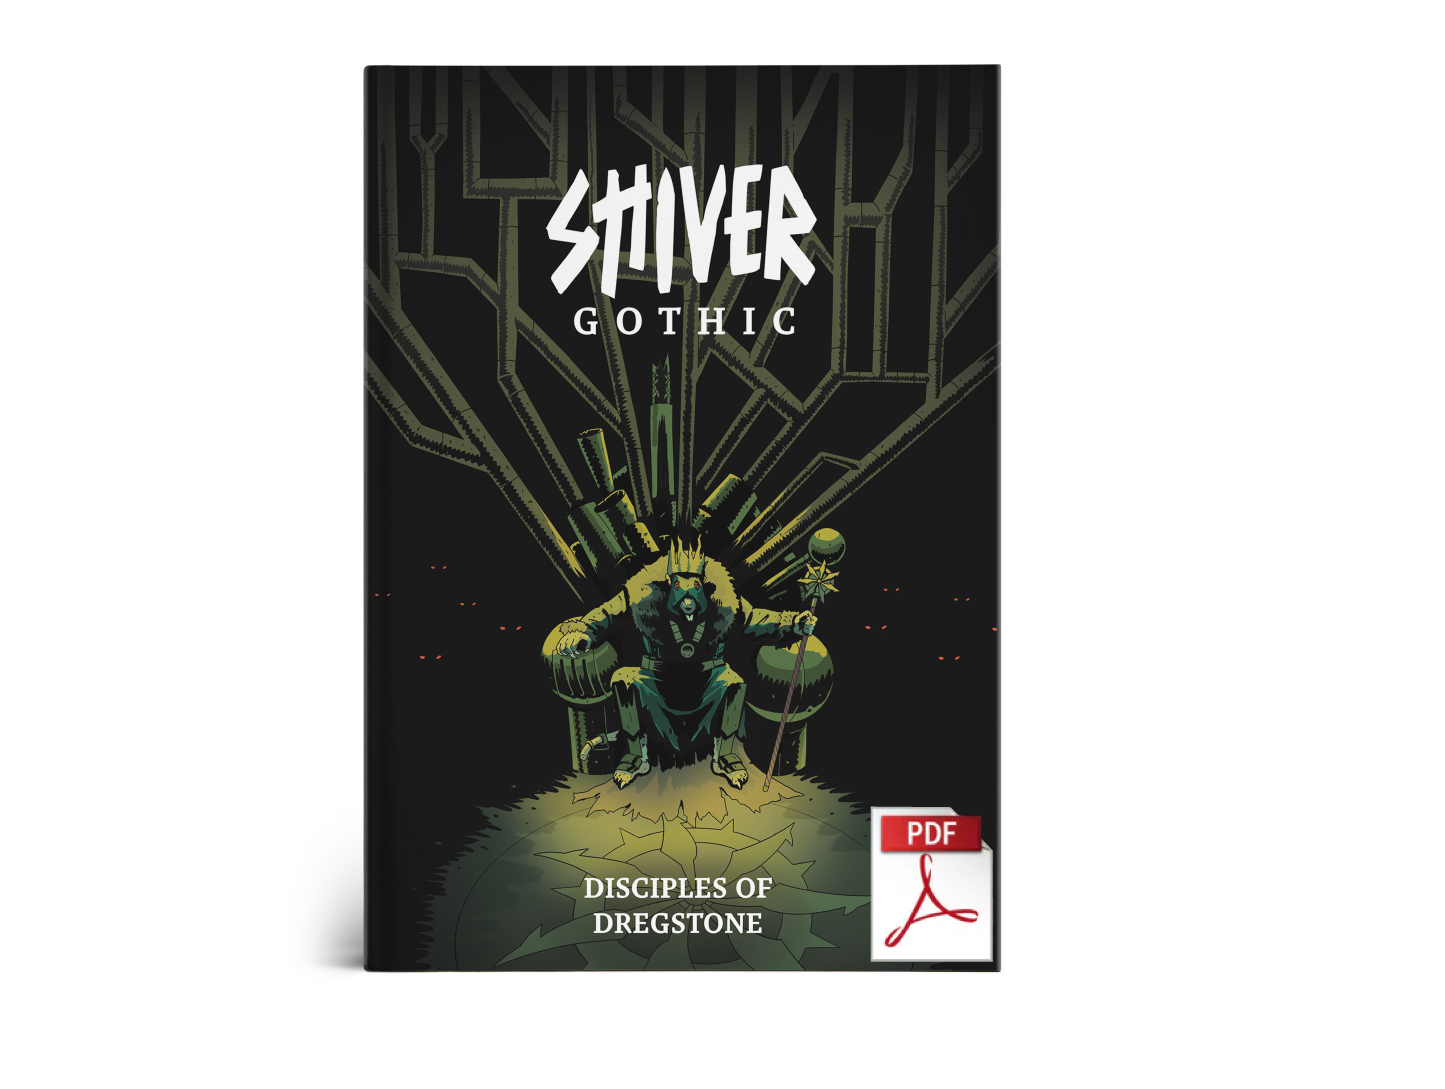 SHIVER Gothic: Disciples Of Dregstone (Physical & PDF)